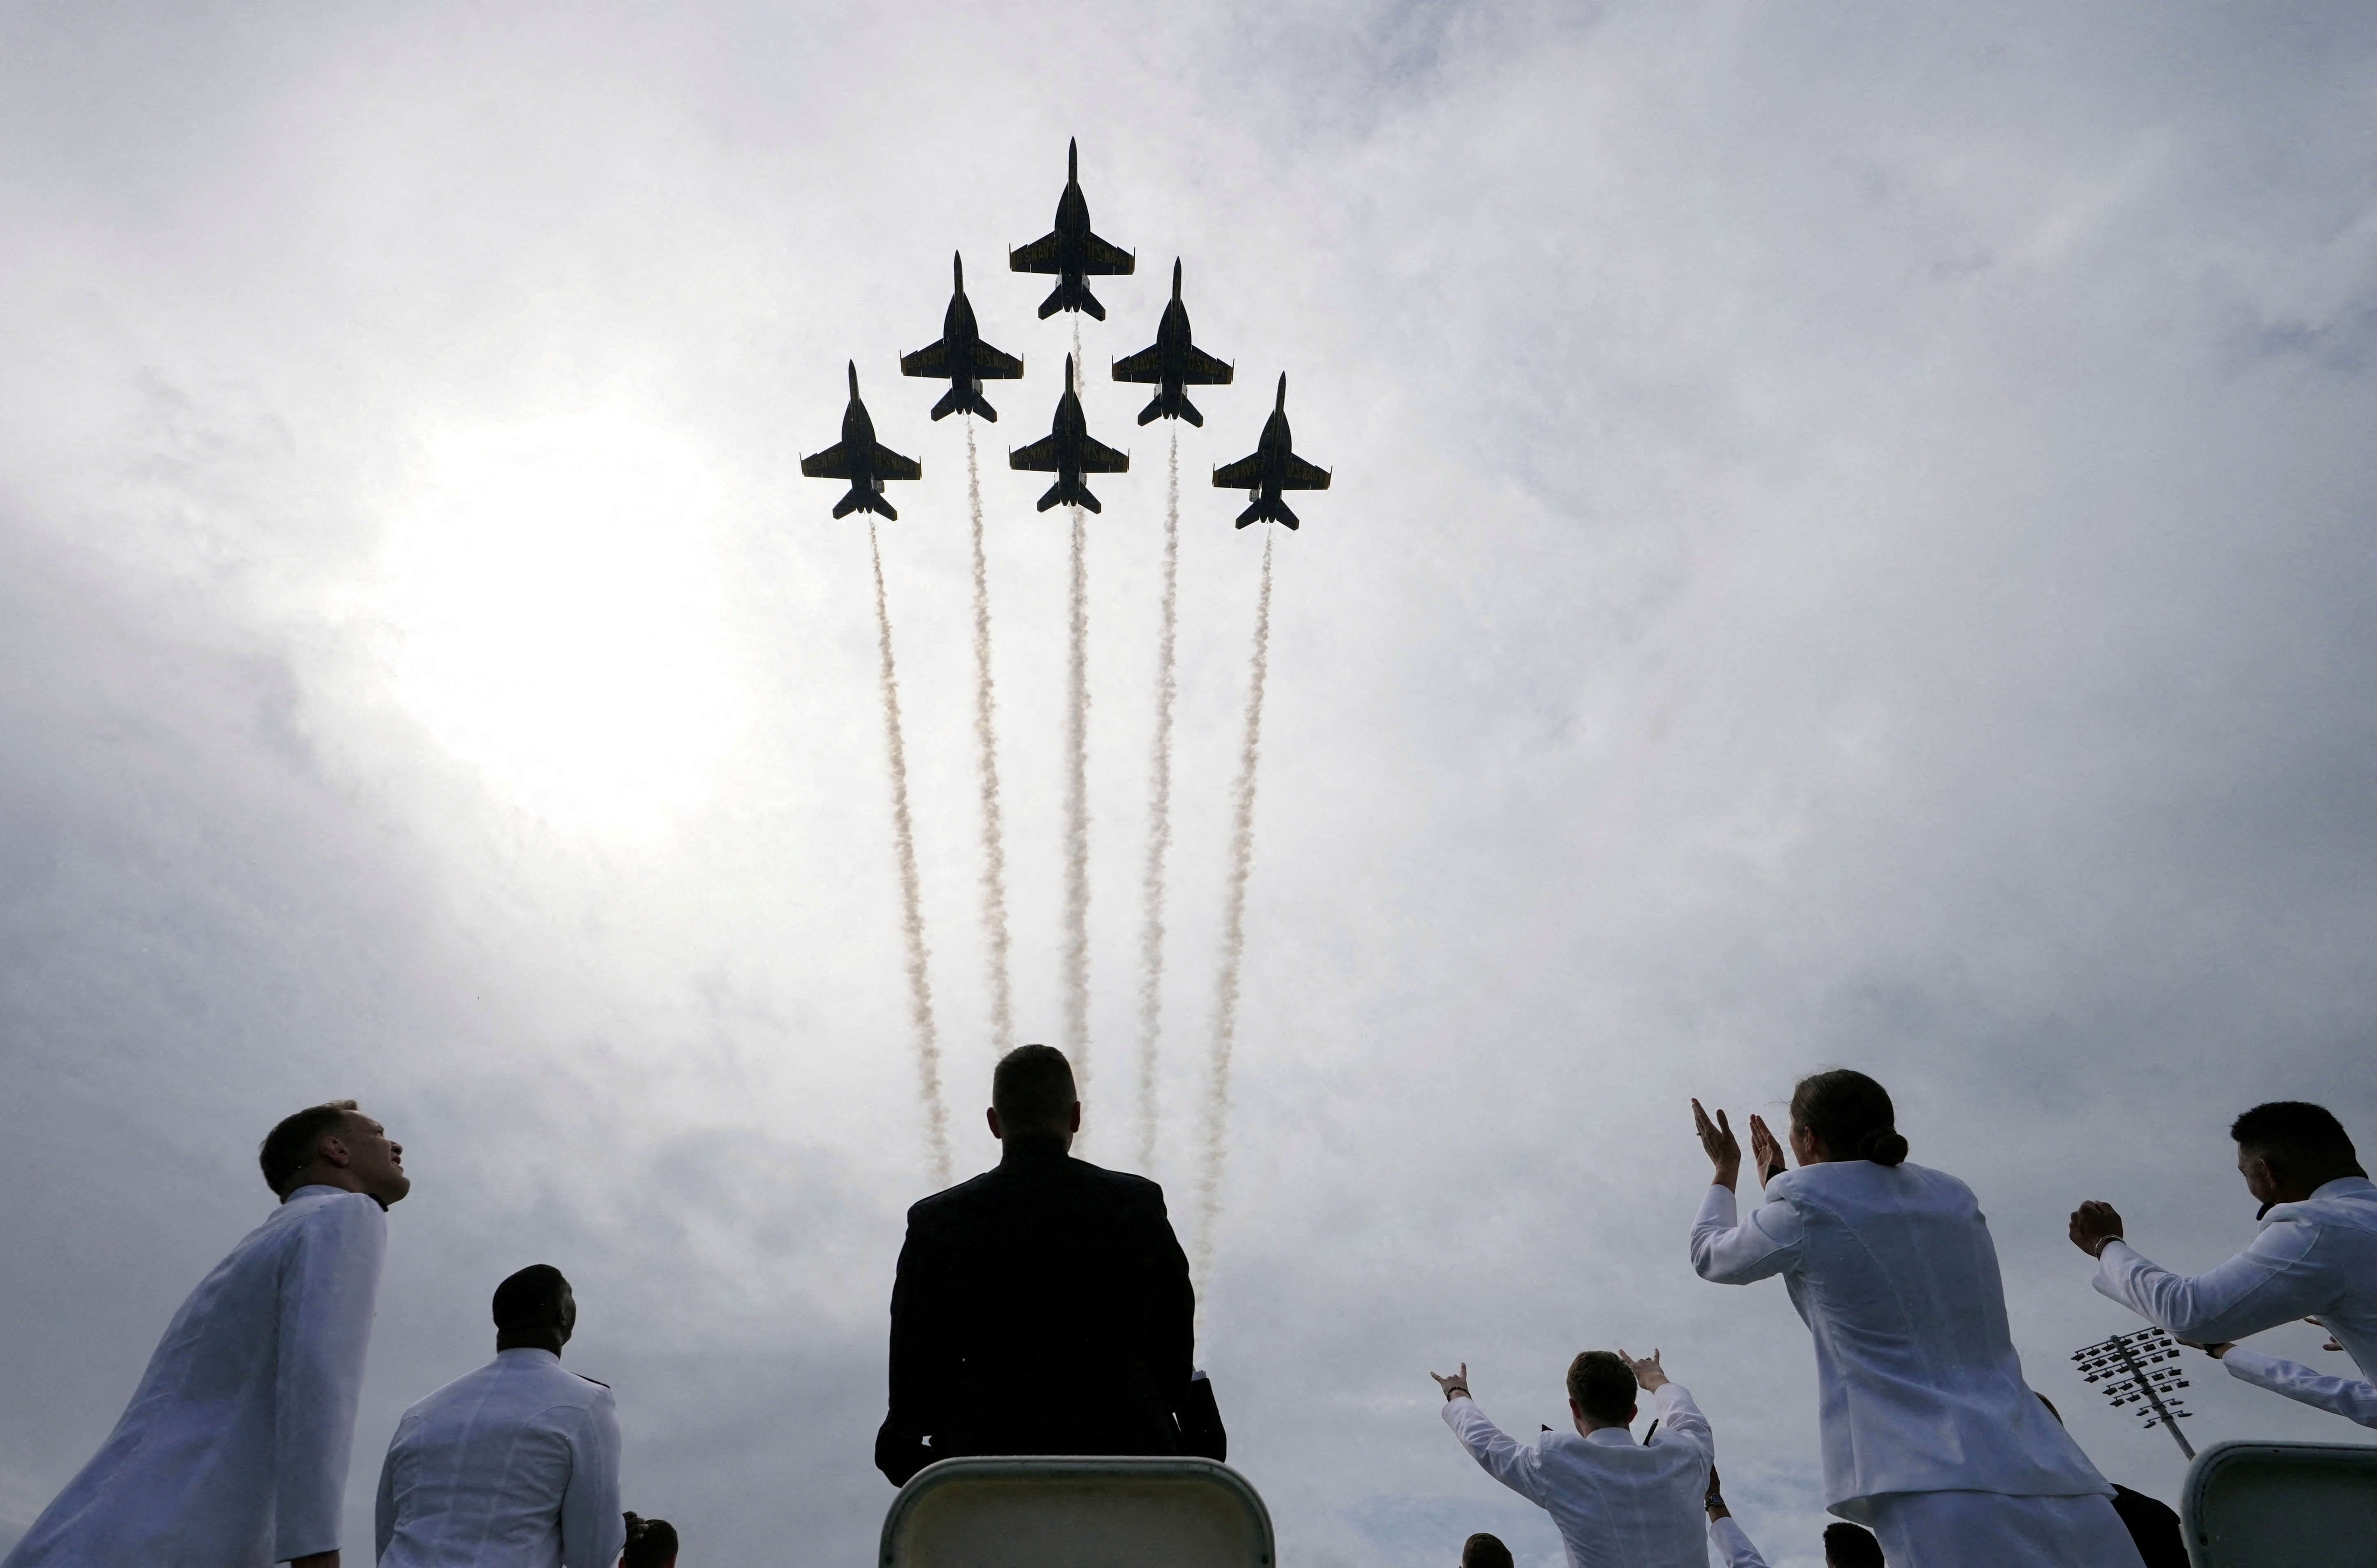 The Blue Angels perform a fly-over at the U.S. Naval Academy graduation in Annapolis